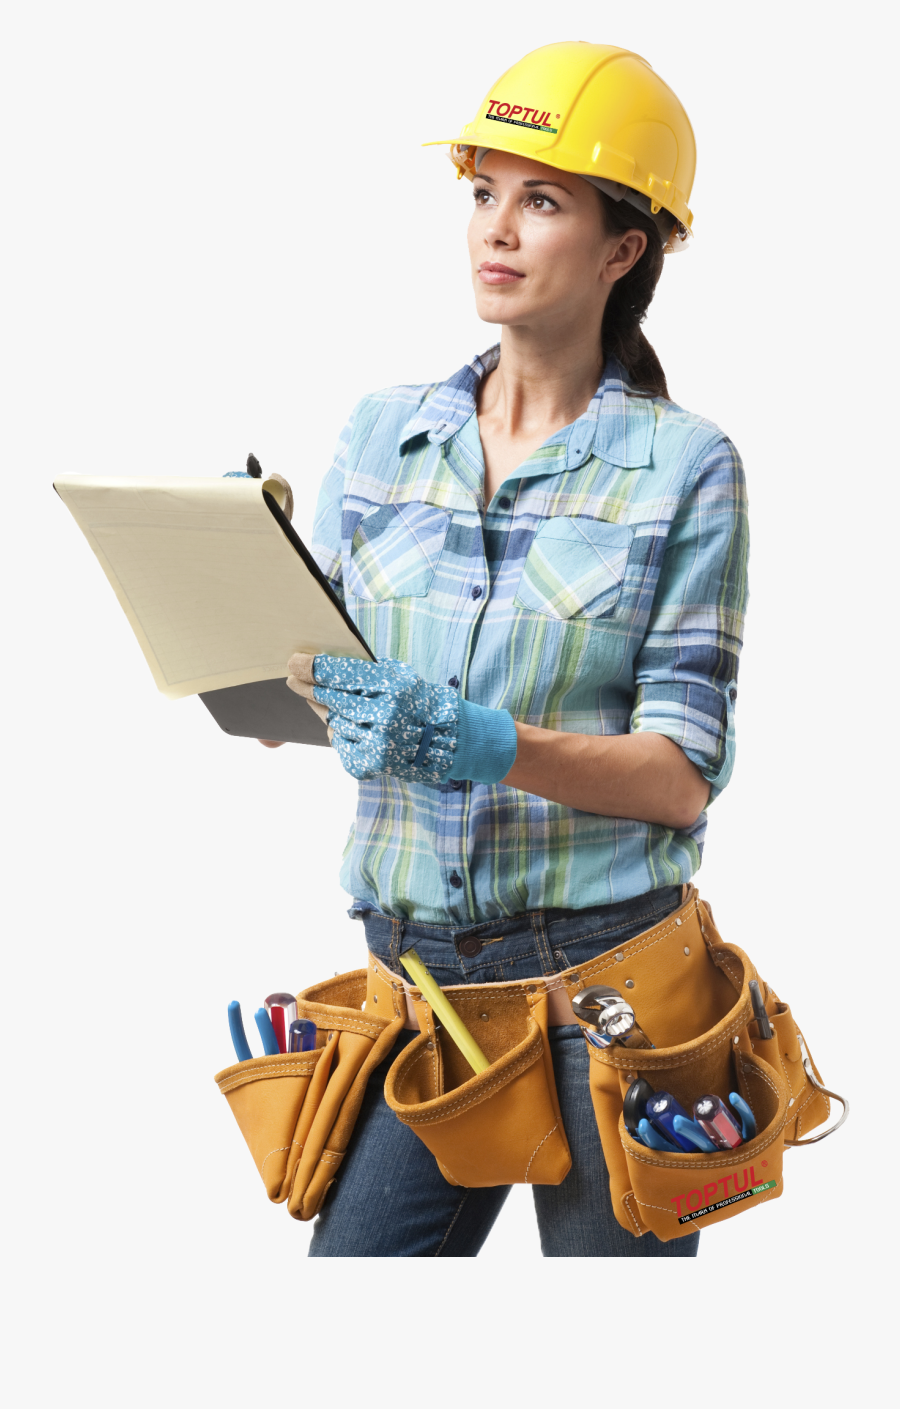 Free Download Of Industrail Workers And Engineers Png - Woman Construction Worker Png, Transparent Clipart